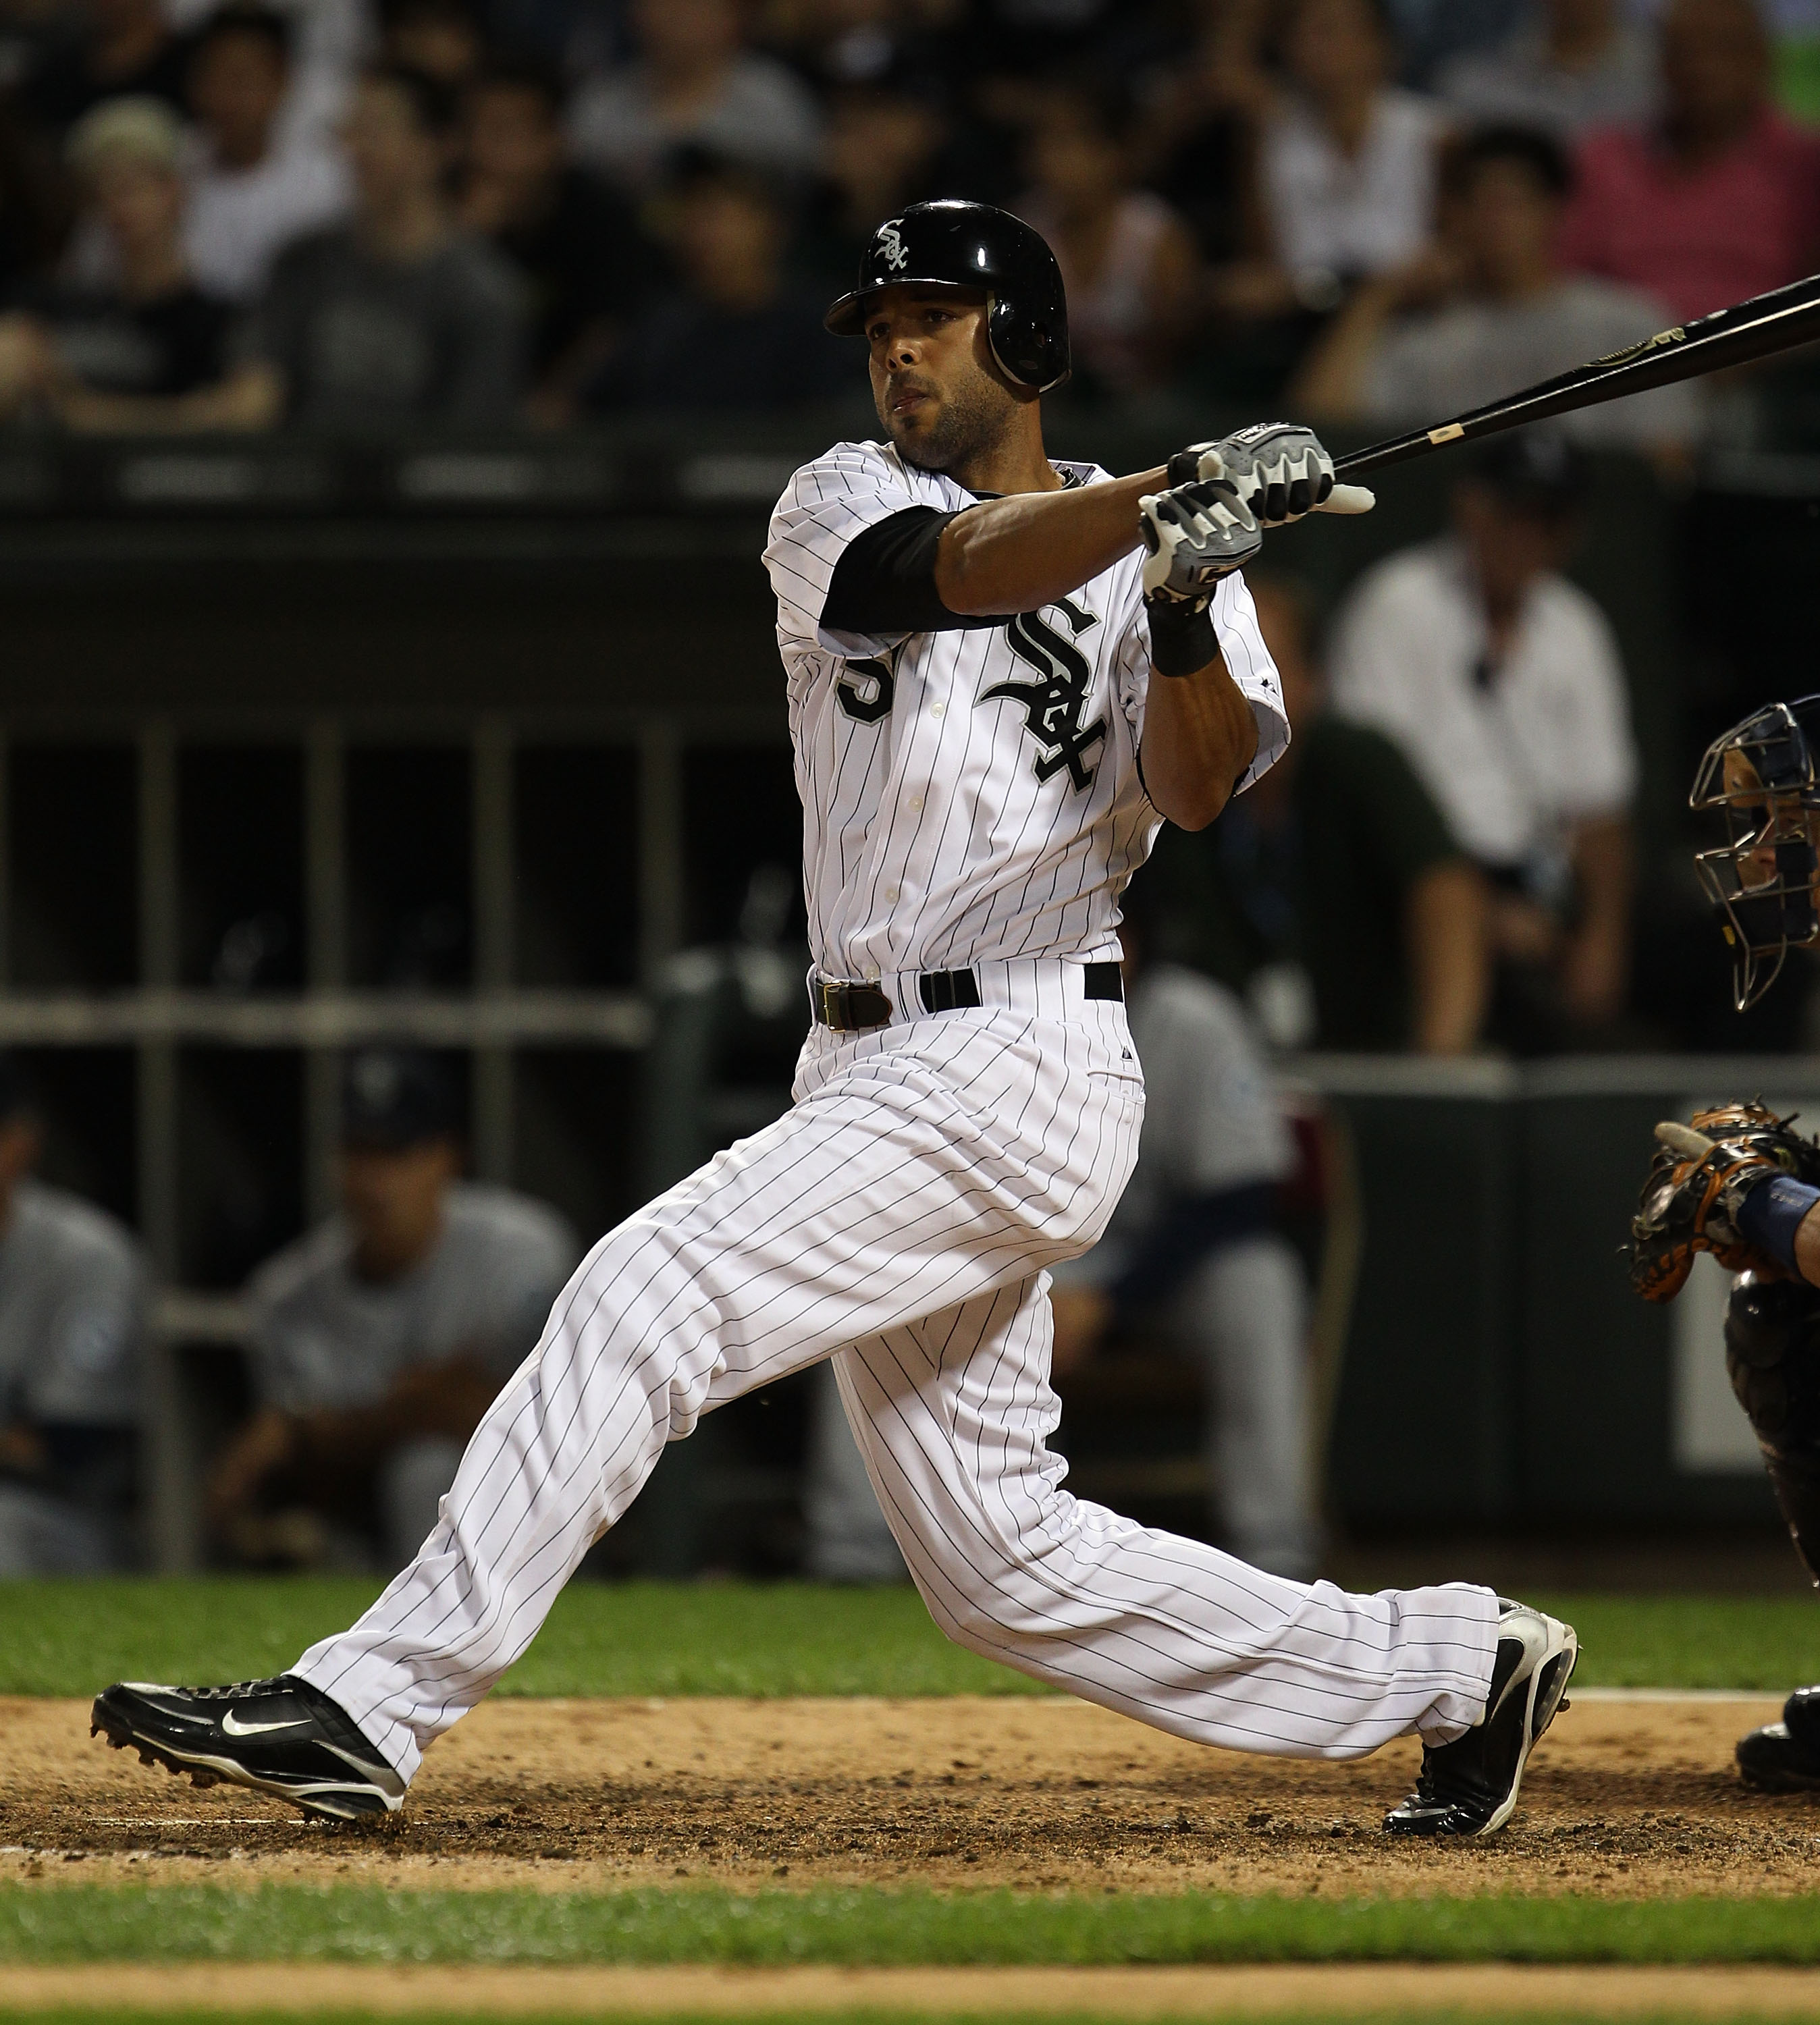 Cubs reportedly claim Podsednik off waivers from White Sox